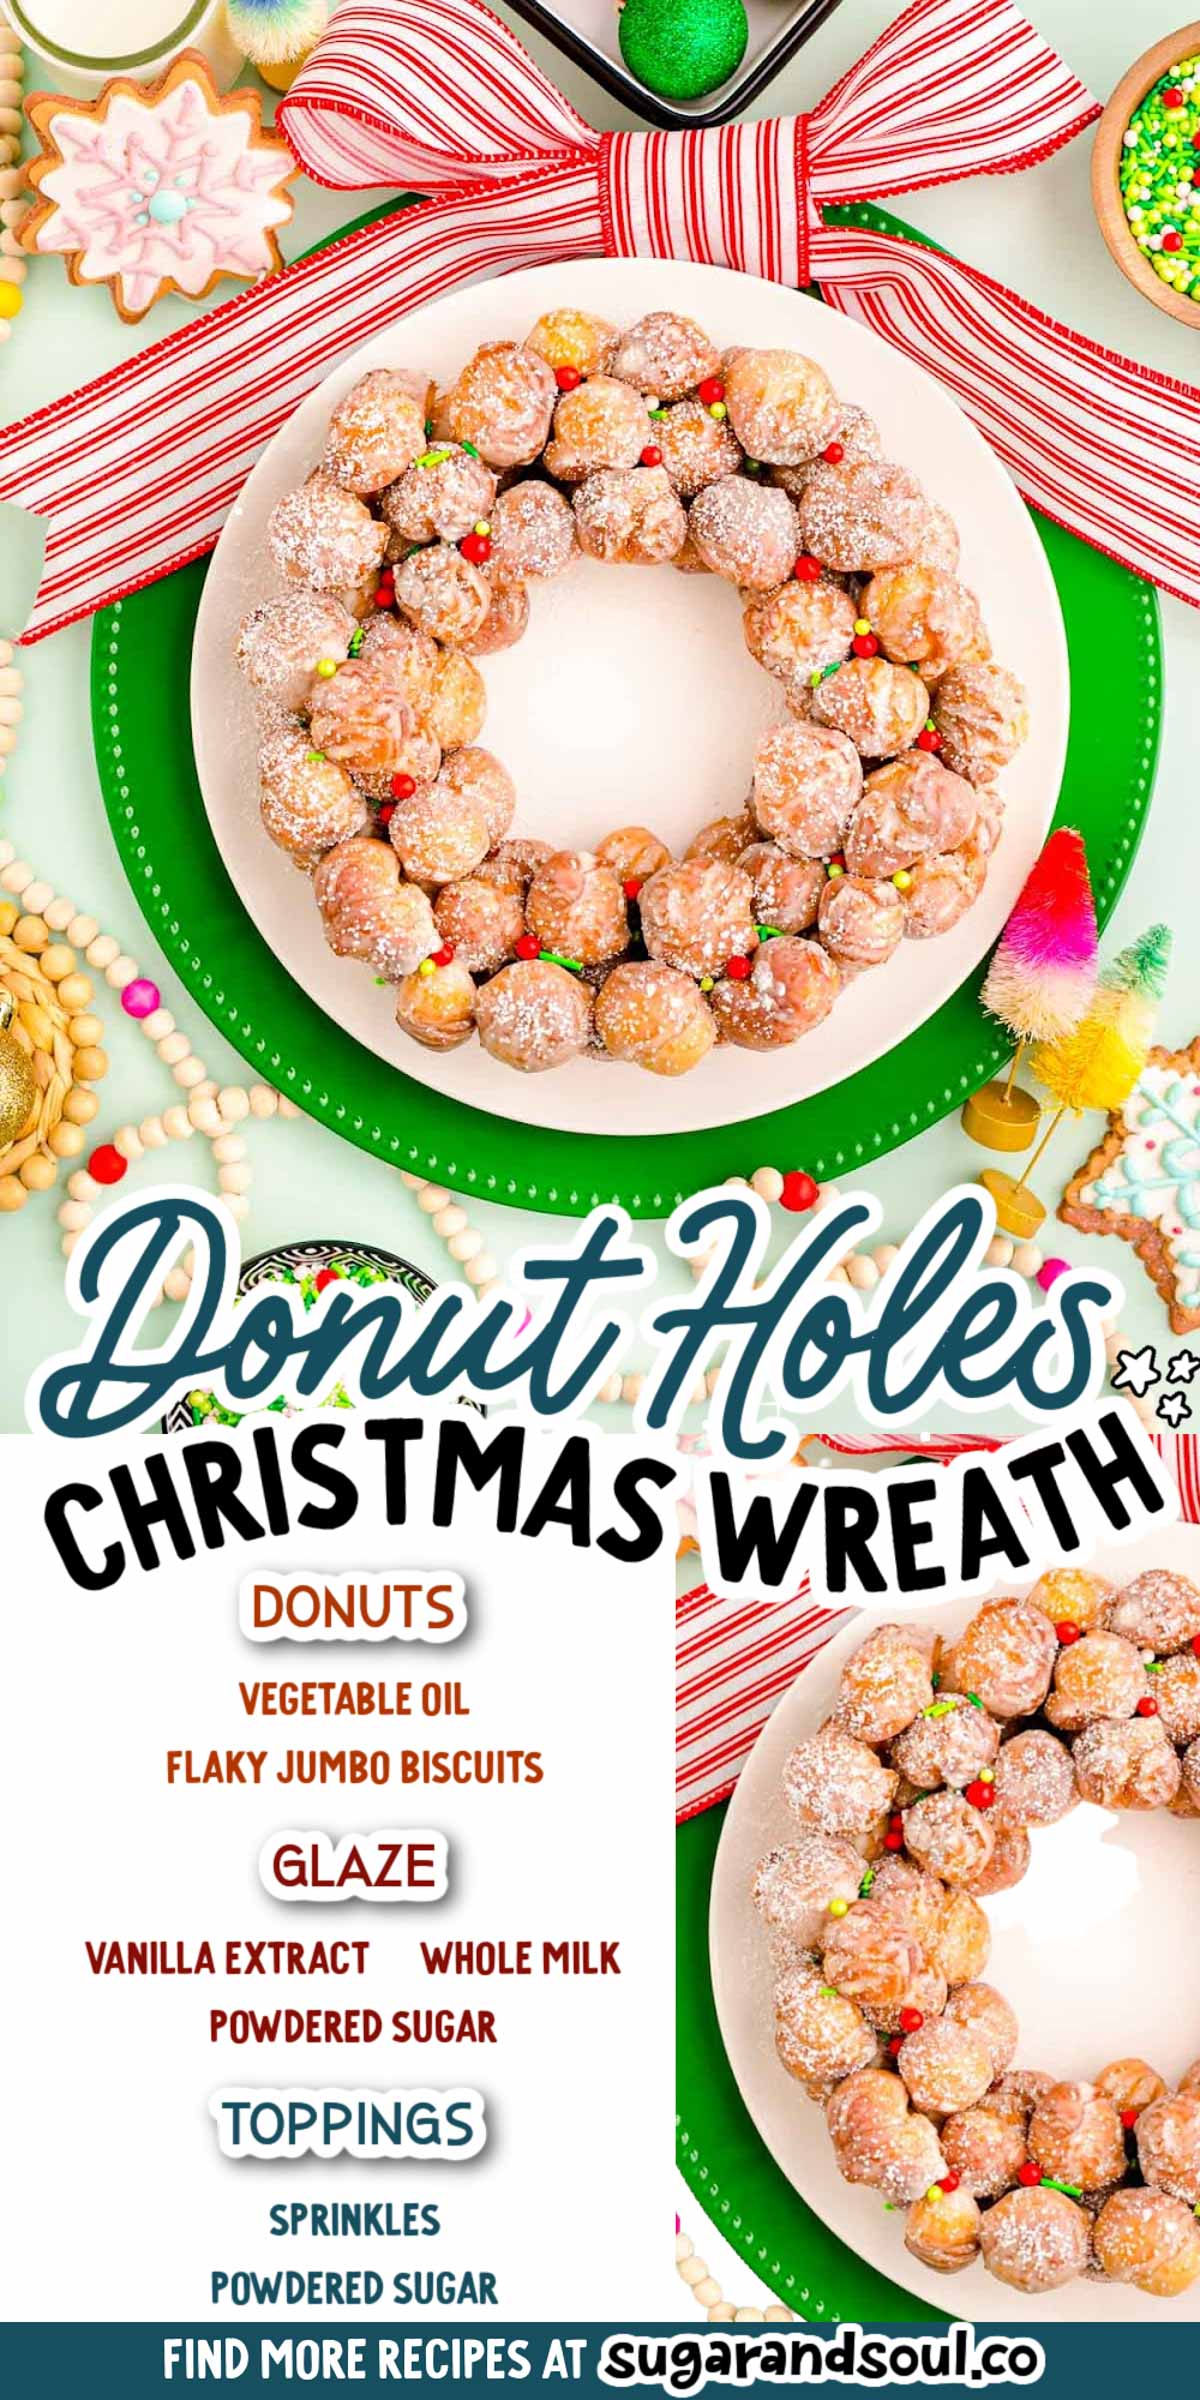 Donut Hole Christmas Wreath turns canned biscuits into delicious donuts that get a sweet glaze before being assembled into a festive wreath! 30 minutes is all it takes to serve up this fun Christmas morning treat! via @sugarandsoulco